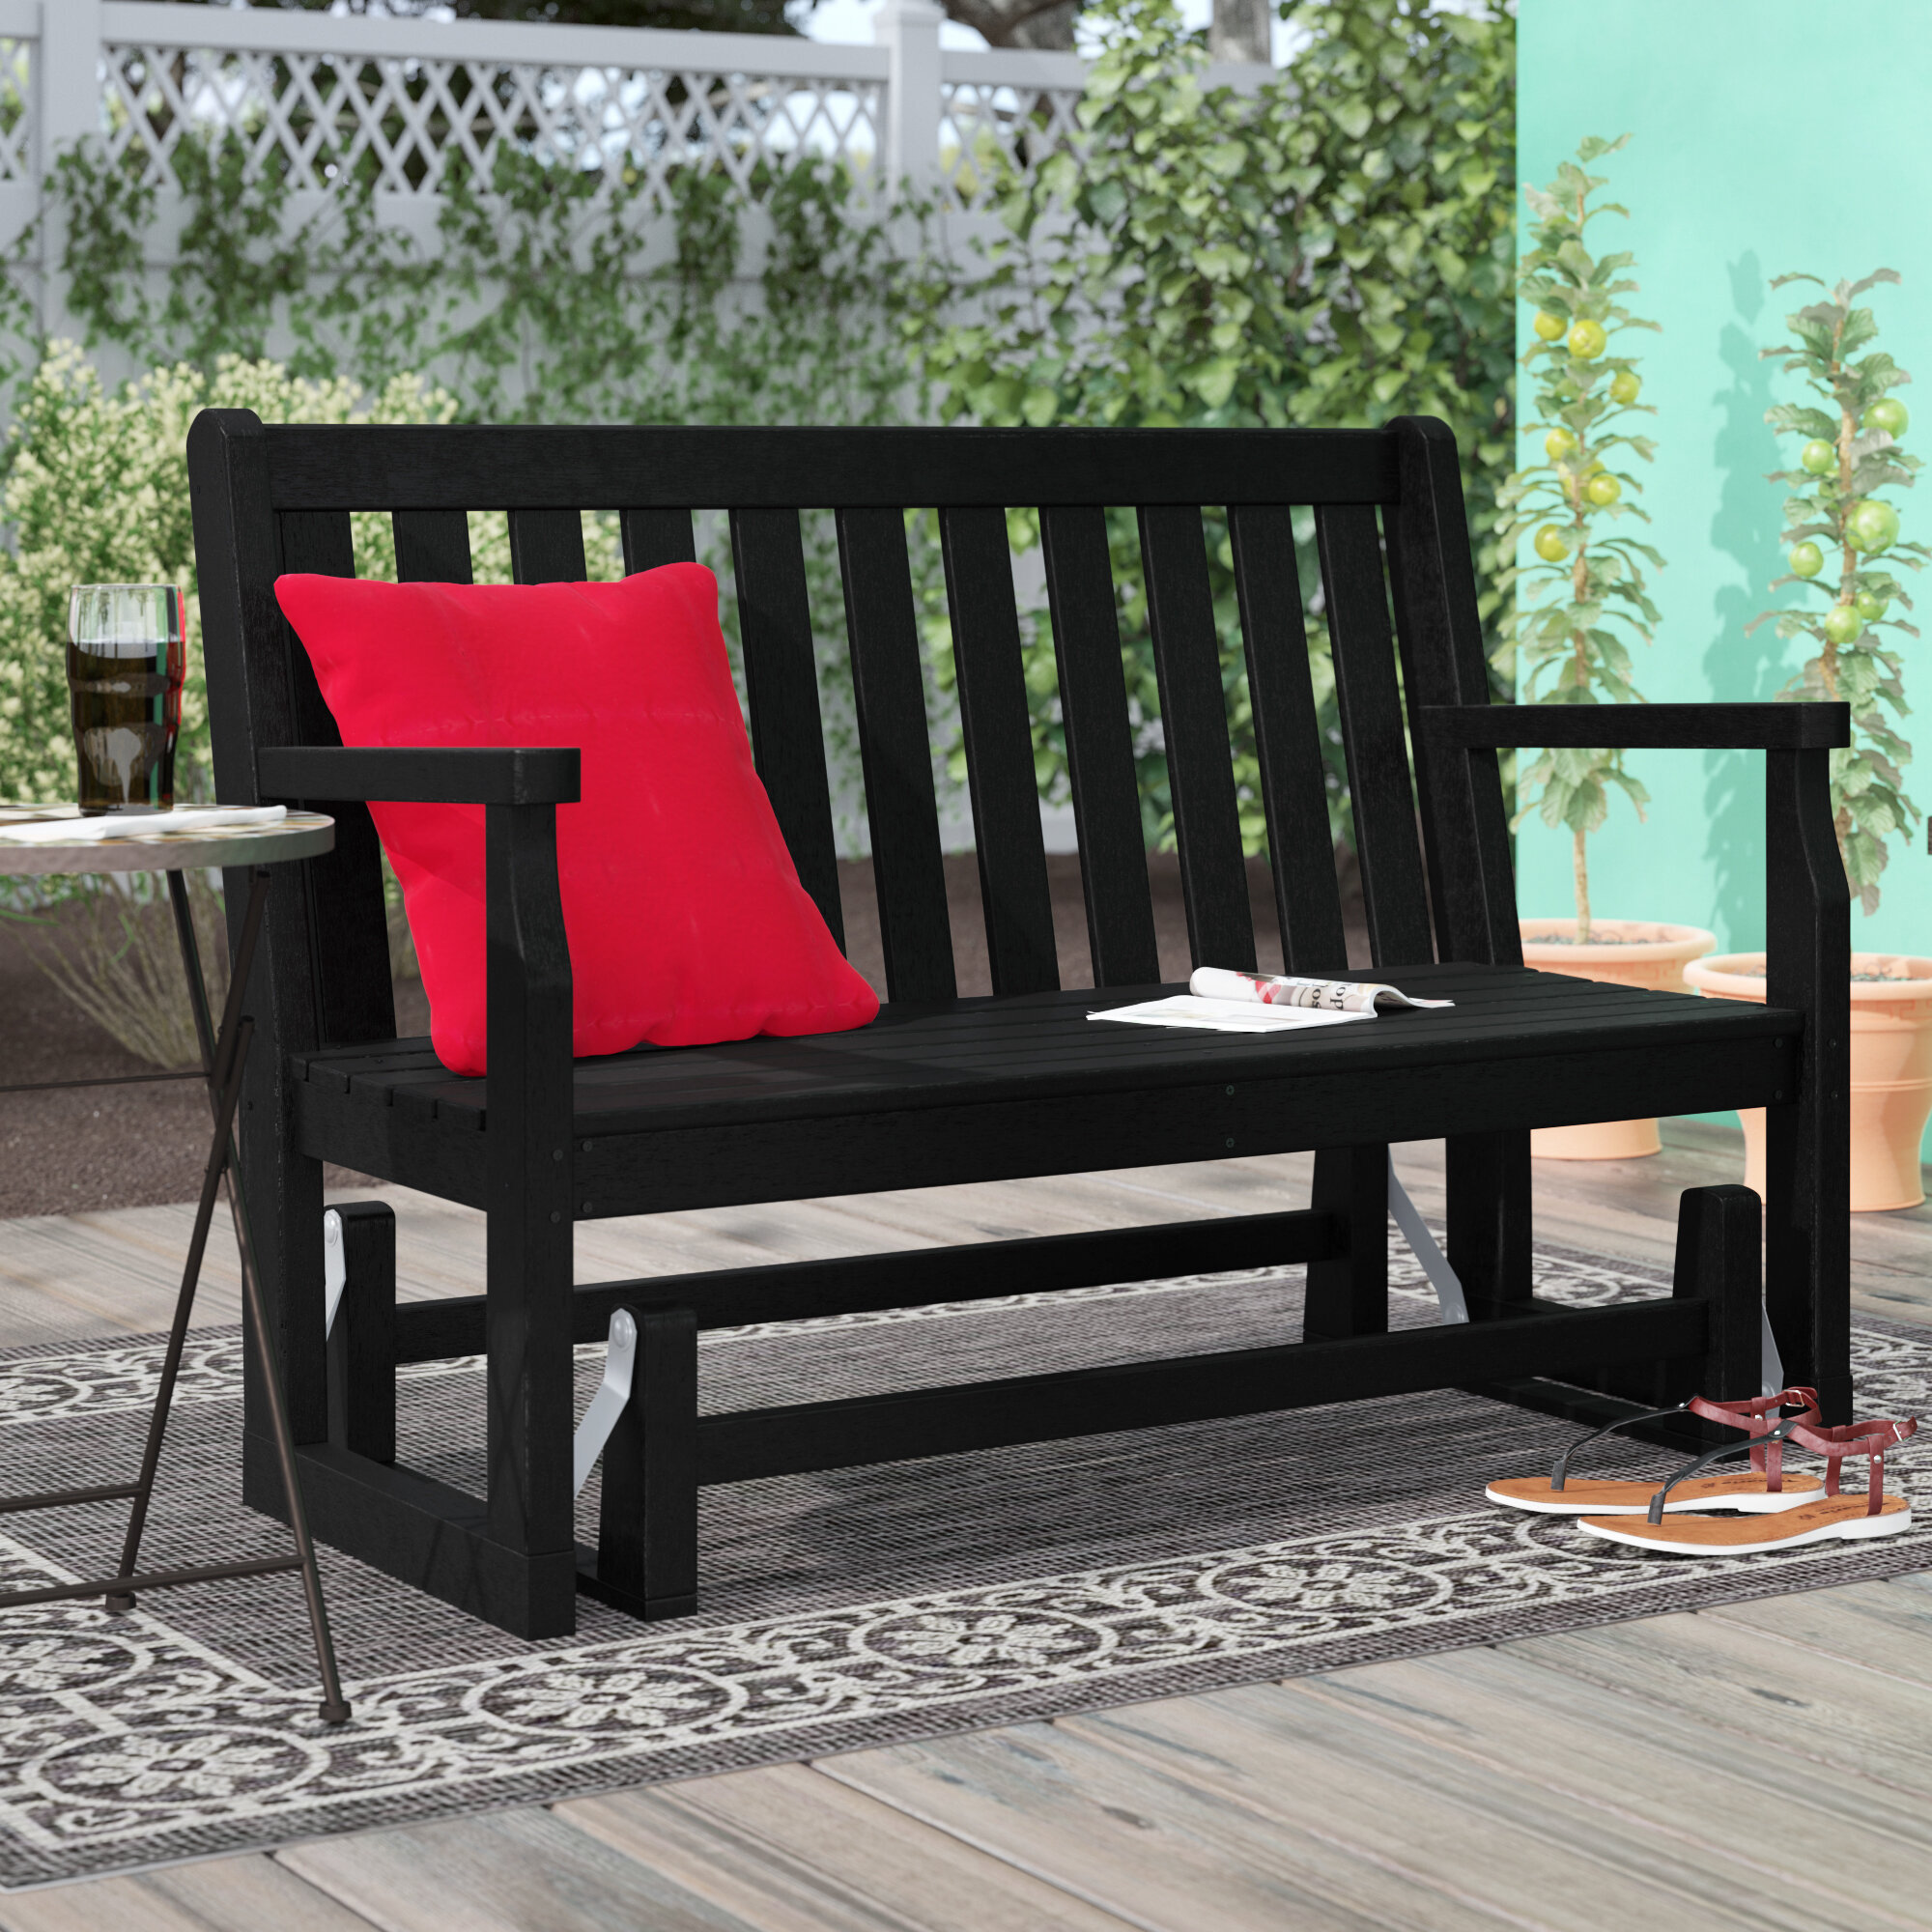 Outdoor Solid Wood Bench Patio Chair Garden Furniture Backyard Park Porch Seat 